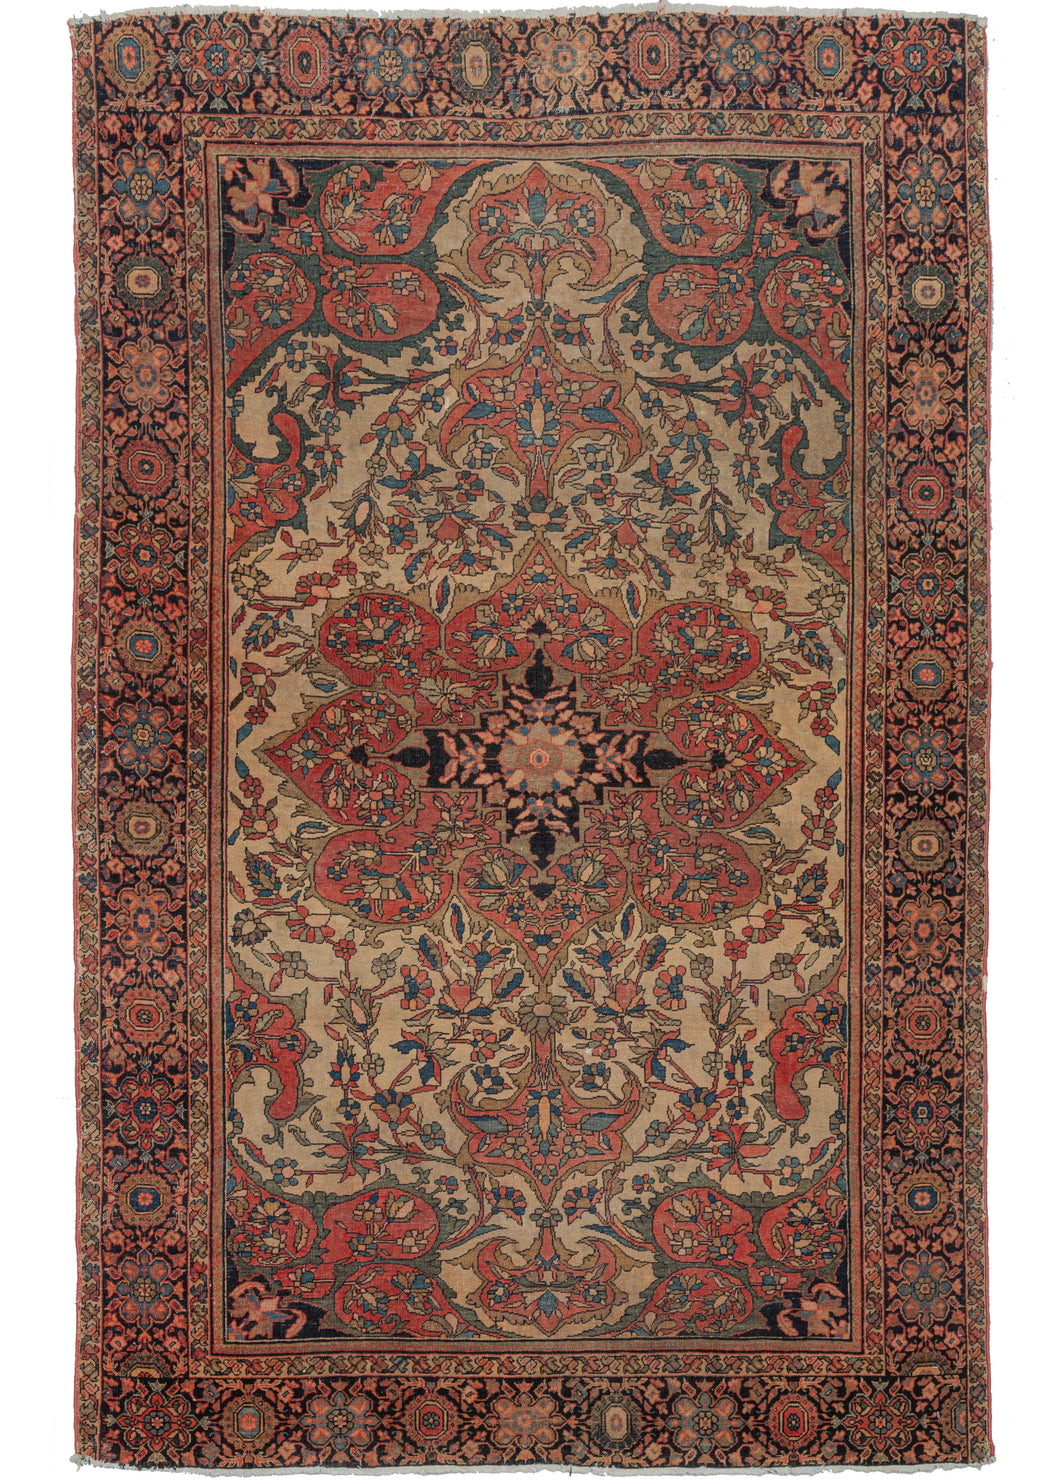 This 19th Century Antique Farahan Sarouk is composed of a brick central medallion with an inky black center flanked by double teardrop medallions on an ivory ground. Very dainty and fine curvilinear tendrils and floral vines make up the overall design, and the whole is framed by four scalloped cornices.